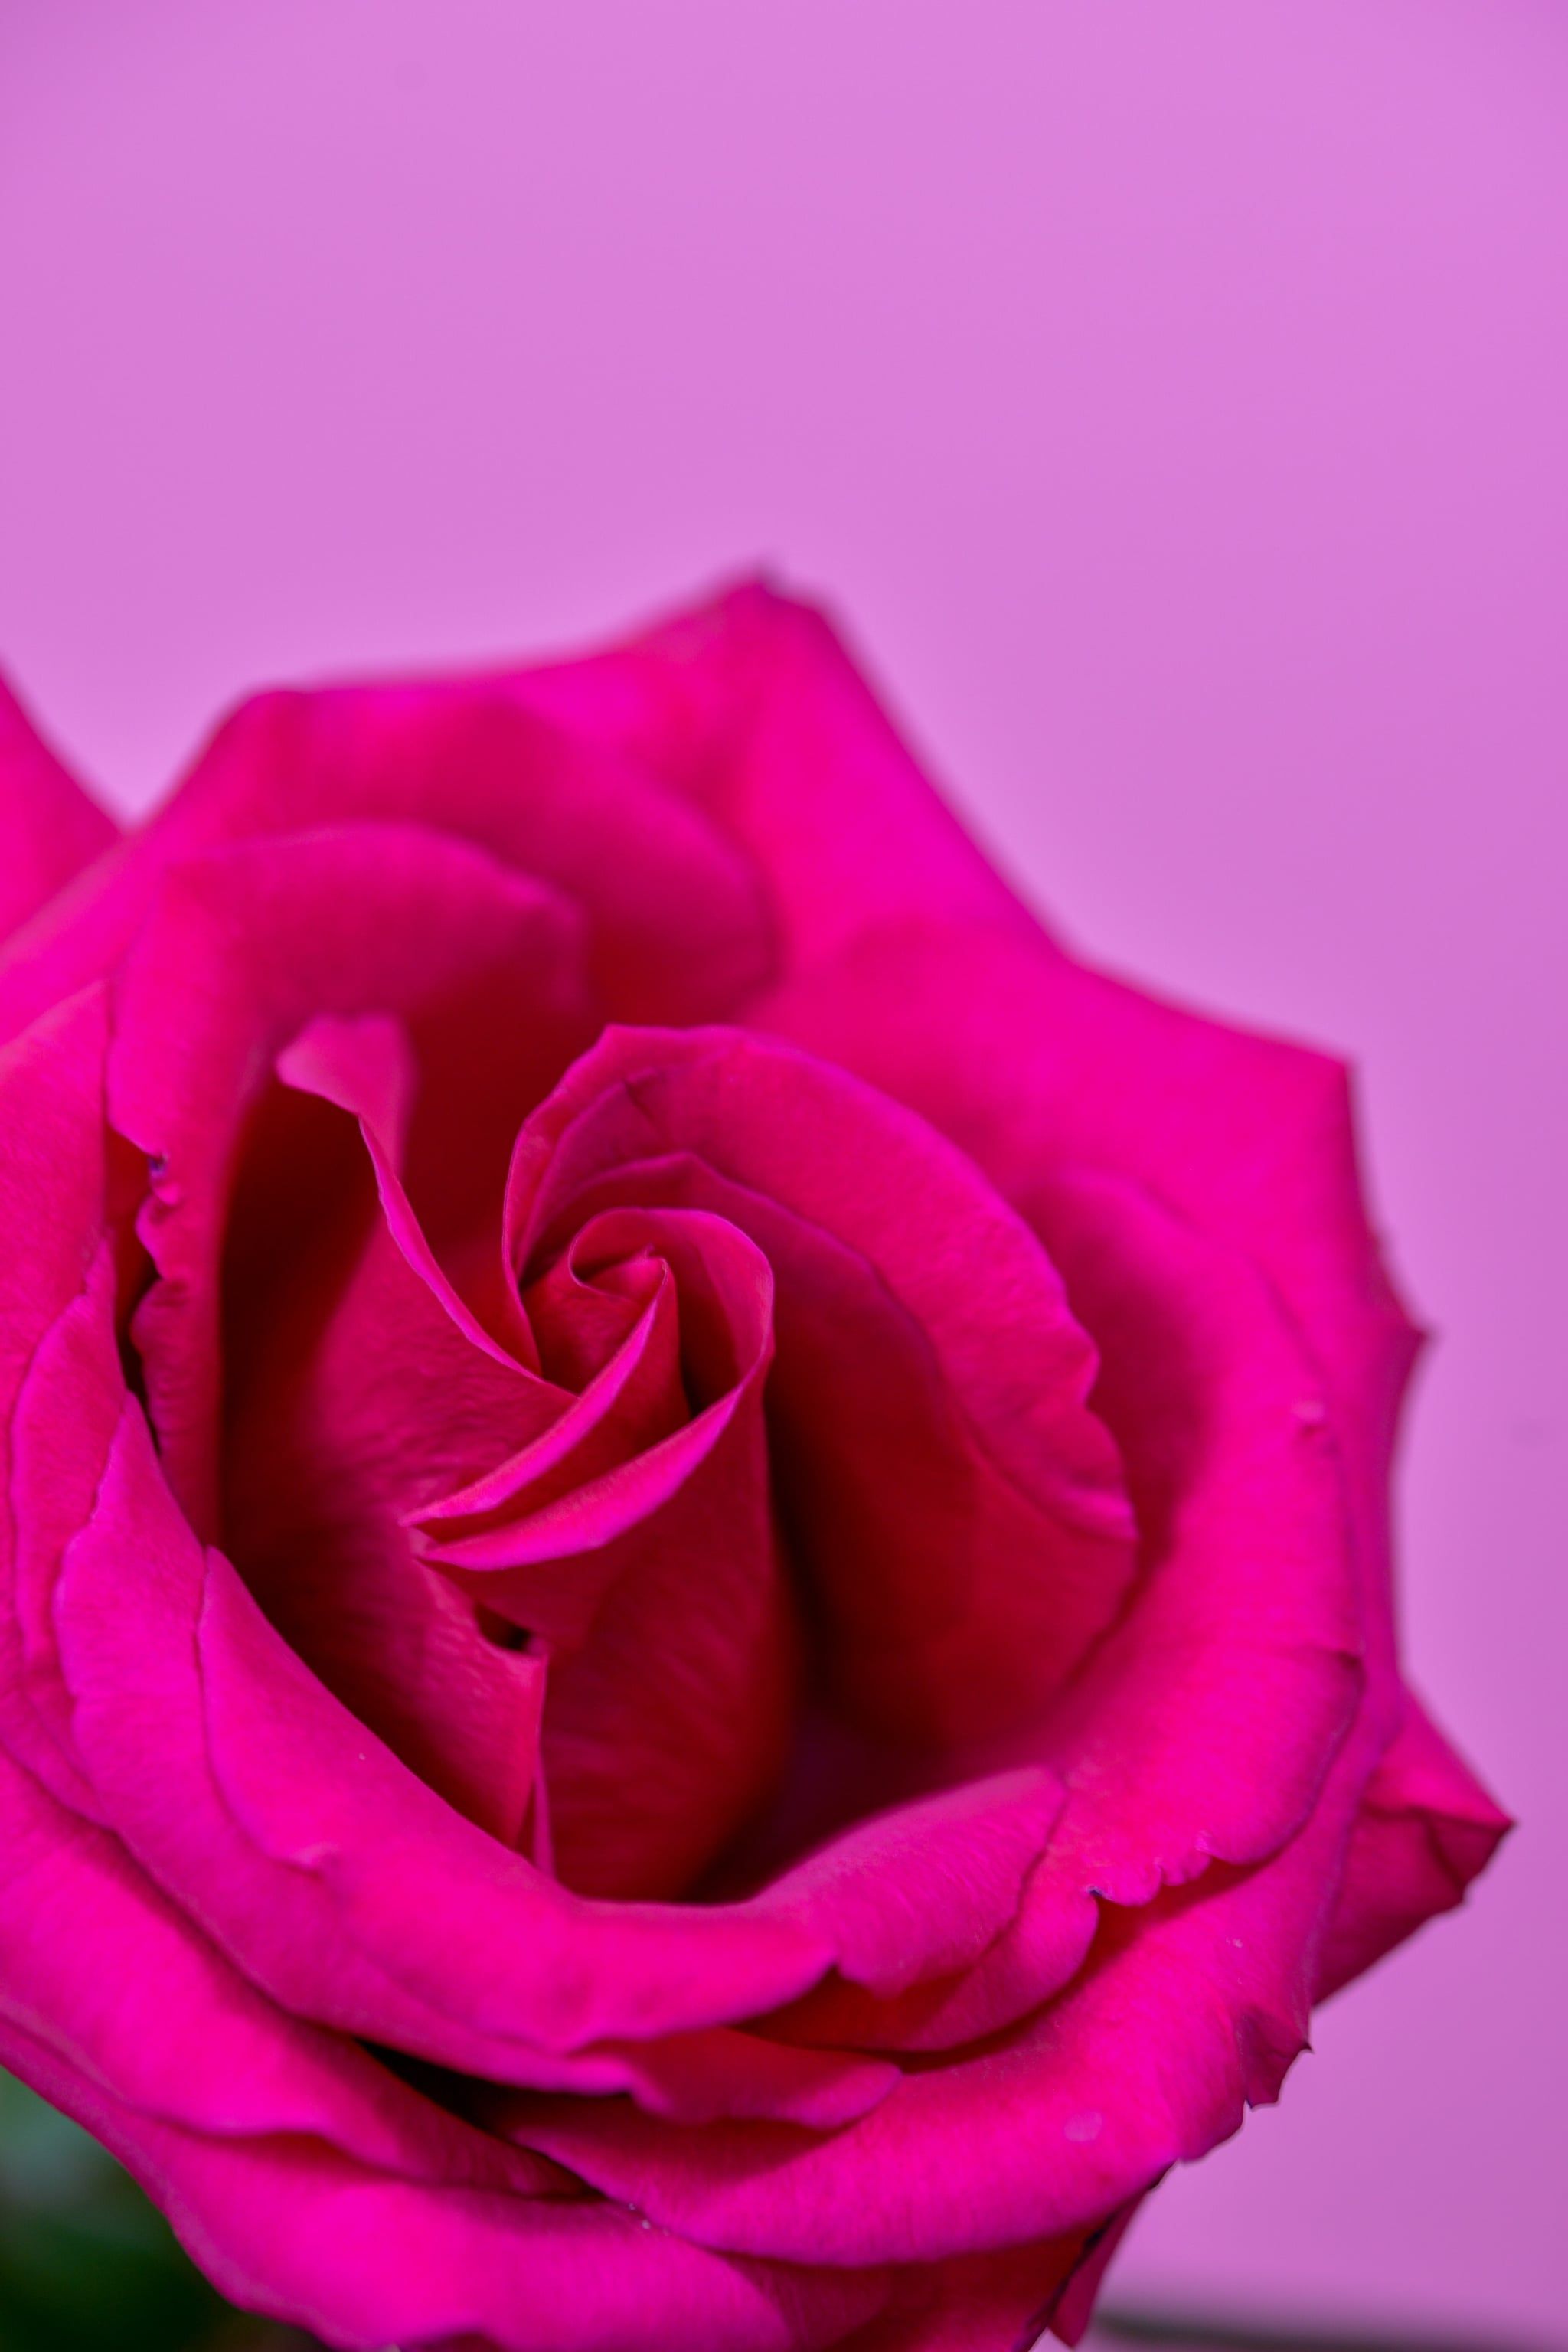 Valentine's Day Wallpaper: Pink Rose. The Dreamiest iPhone Wallpaper For Valentine's Day That Fit Any Aesthetic